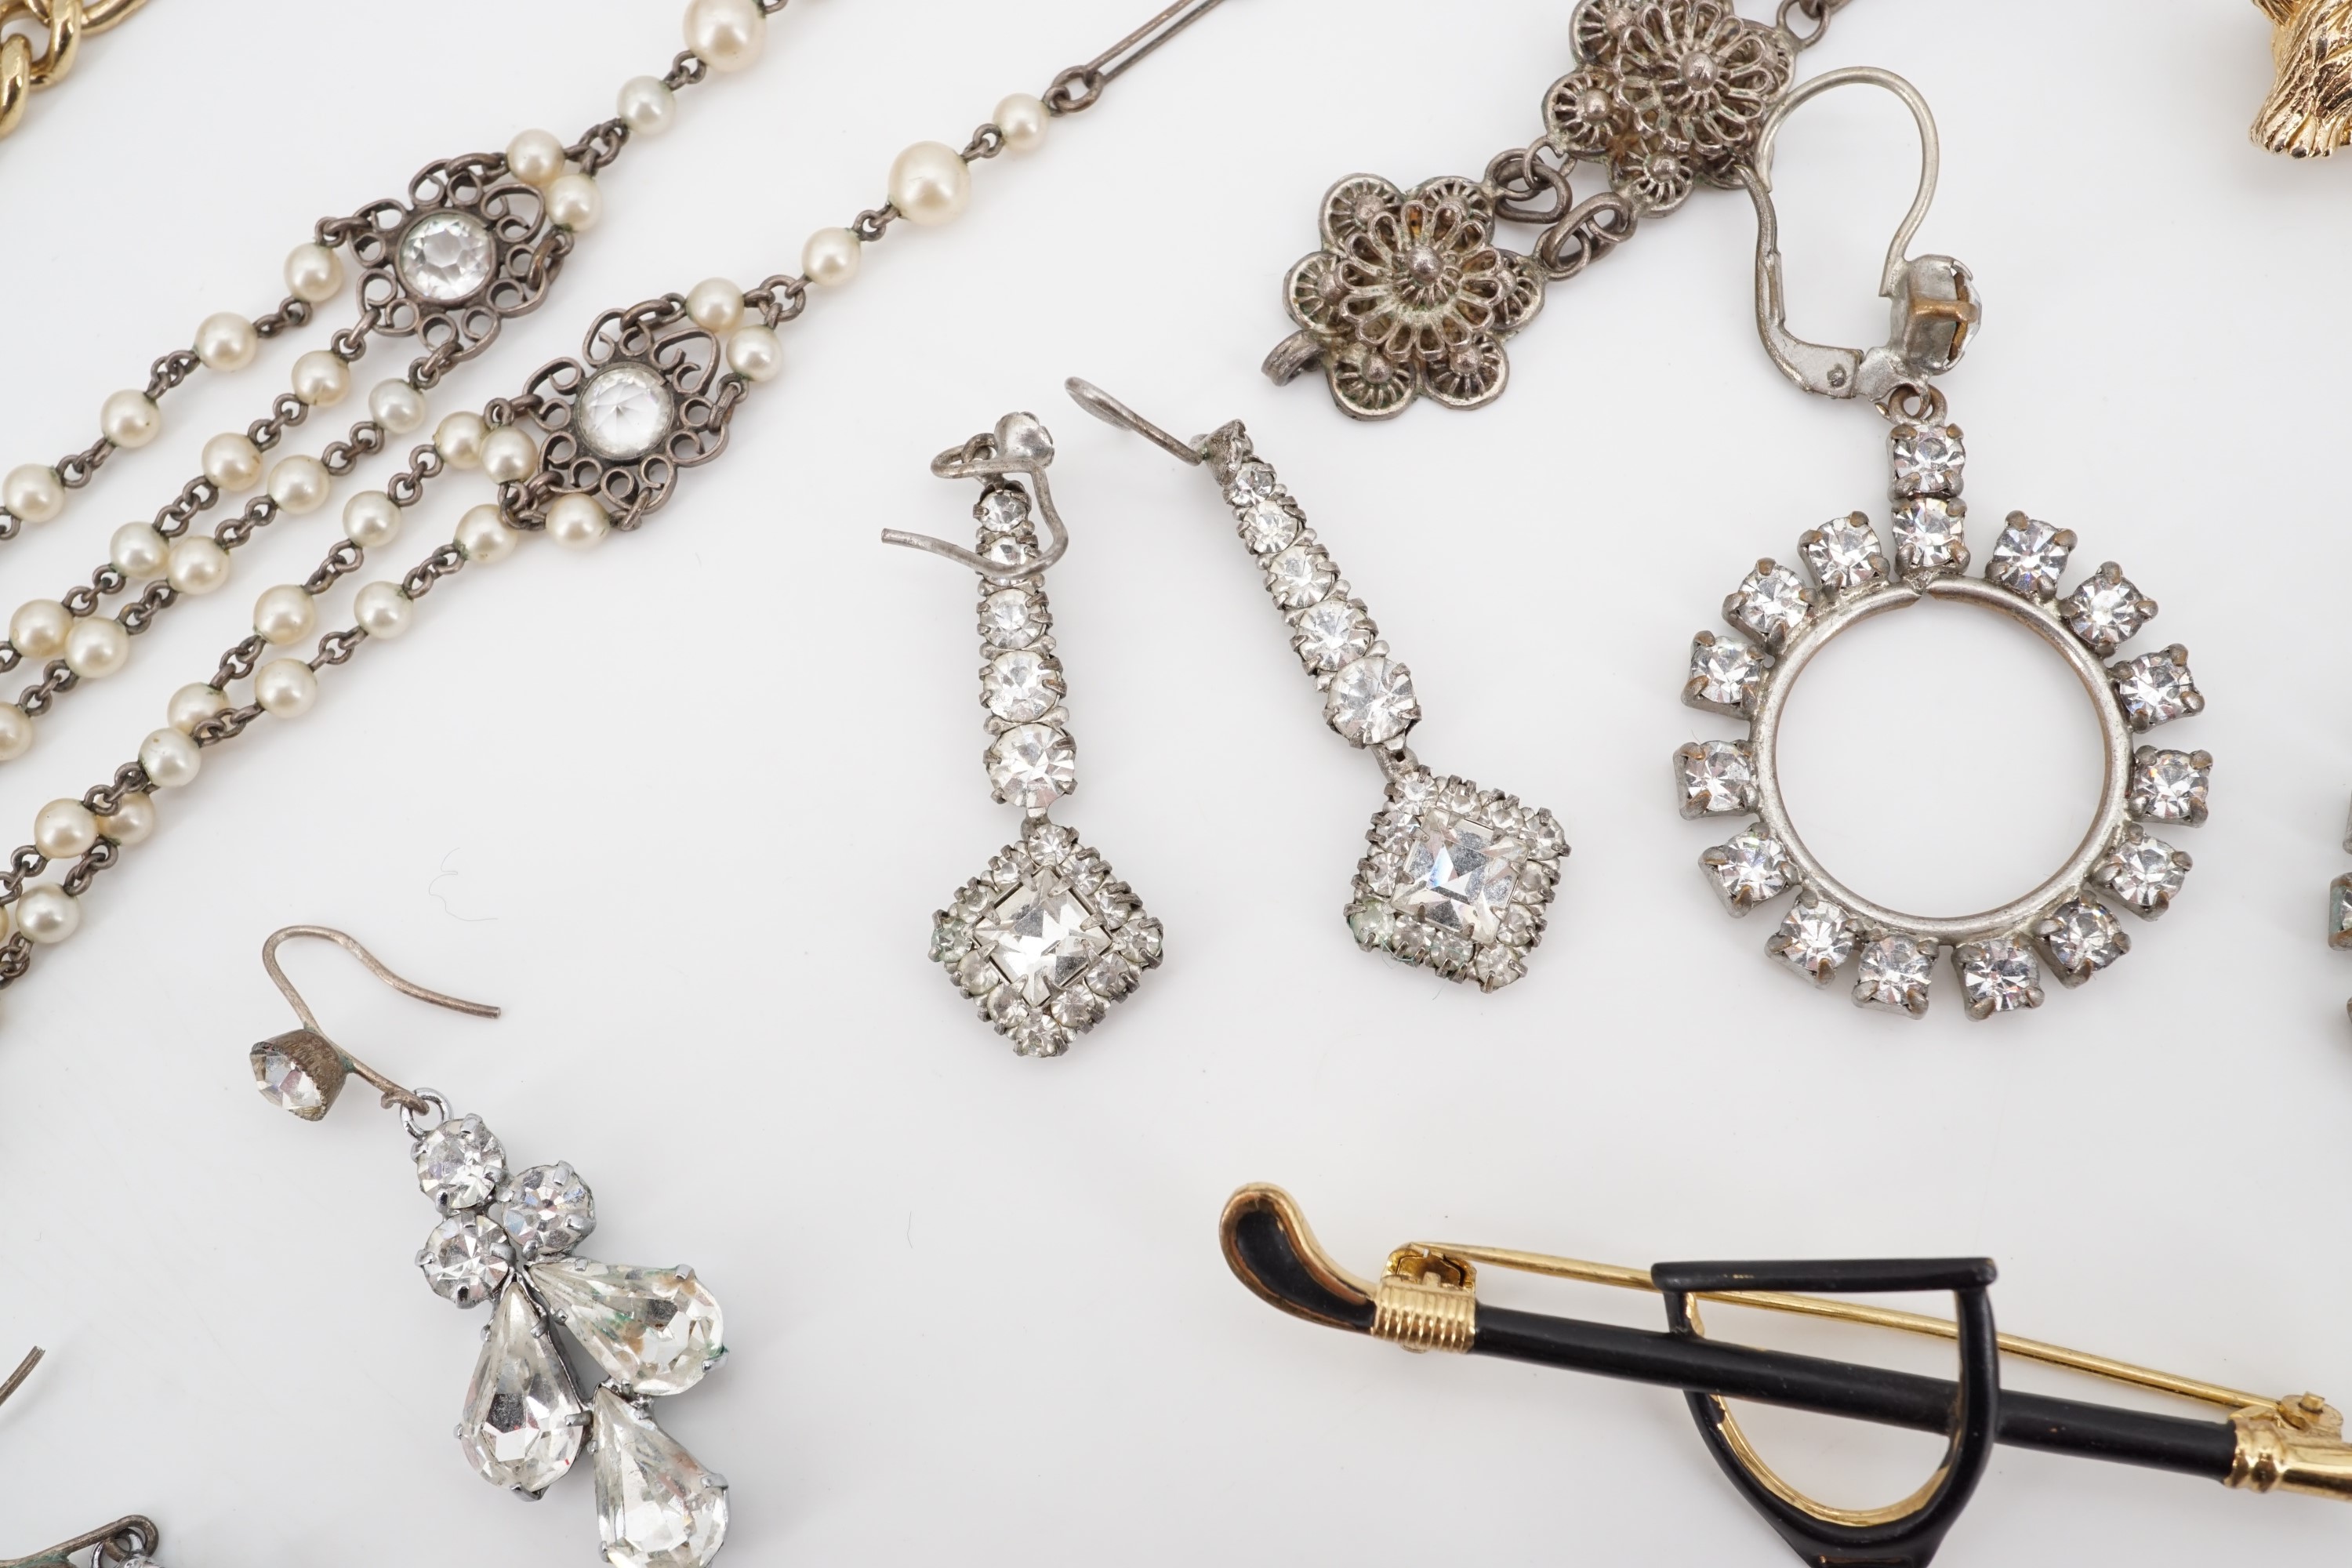 Vintage costume jewellery, including paste ear pendants, brooches, a white metal filigree - Image 3 of 5